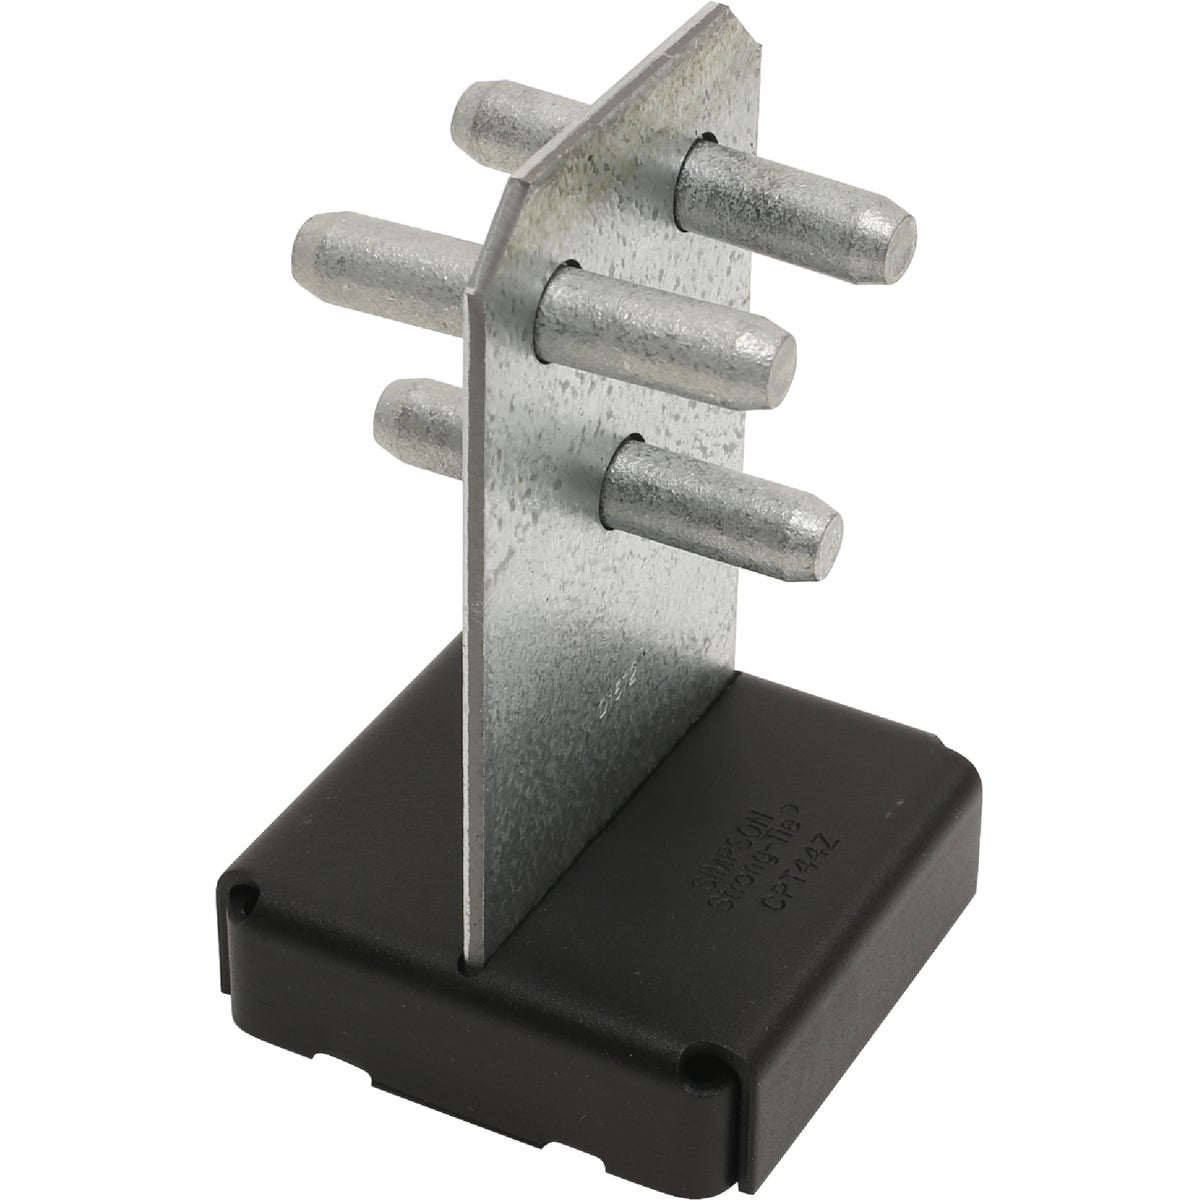 Simpson Strong-Tie 3-1/2 In. x 3-1/2 In. 10 ga Z-Max Concealed Post Base